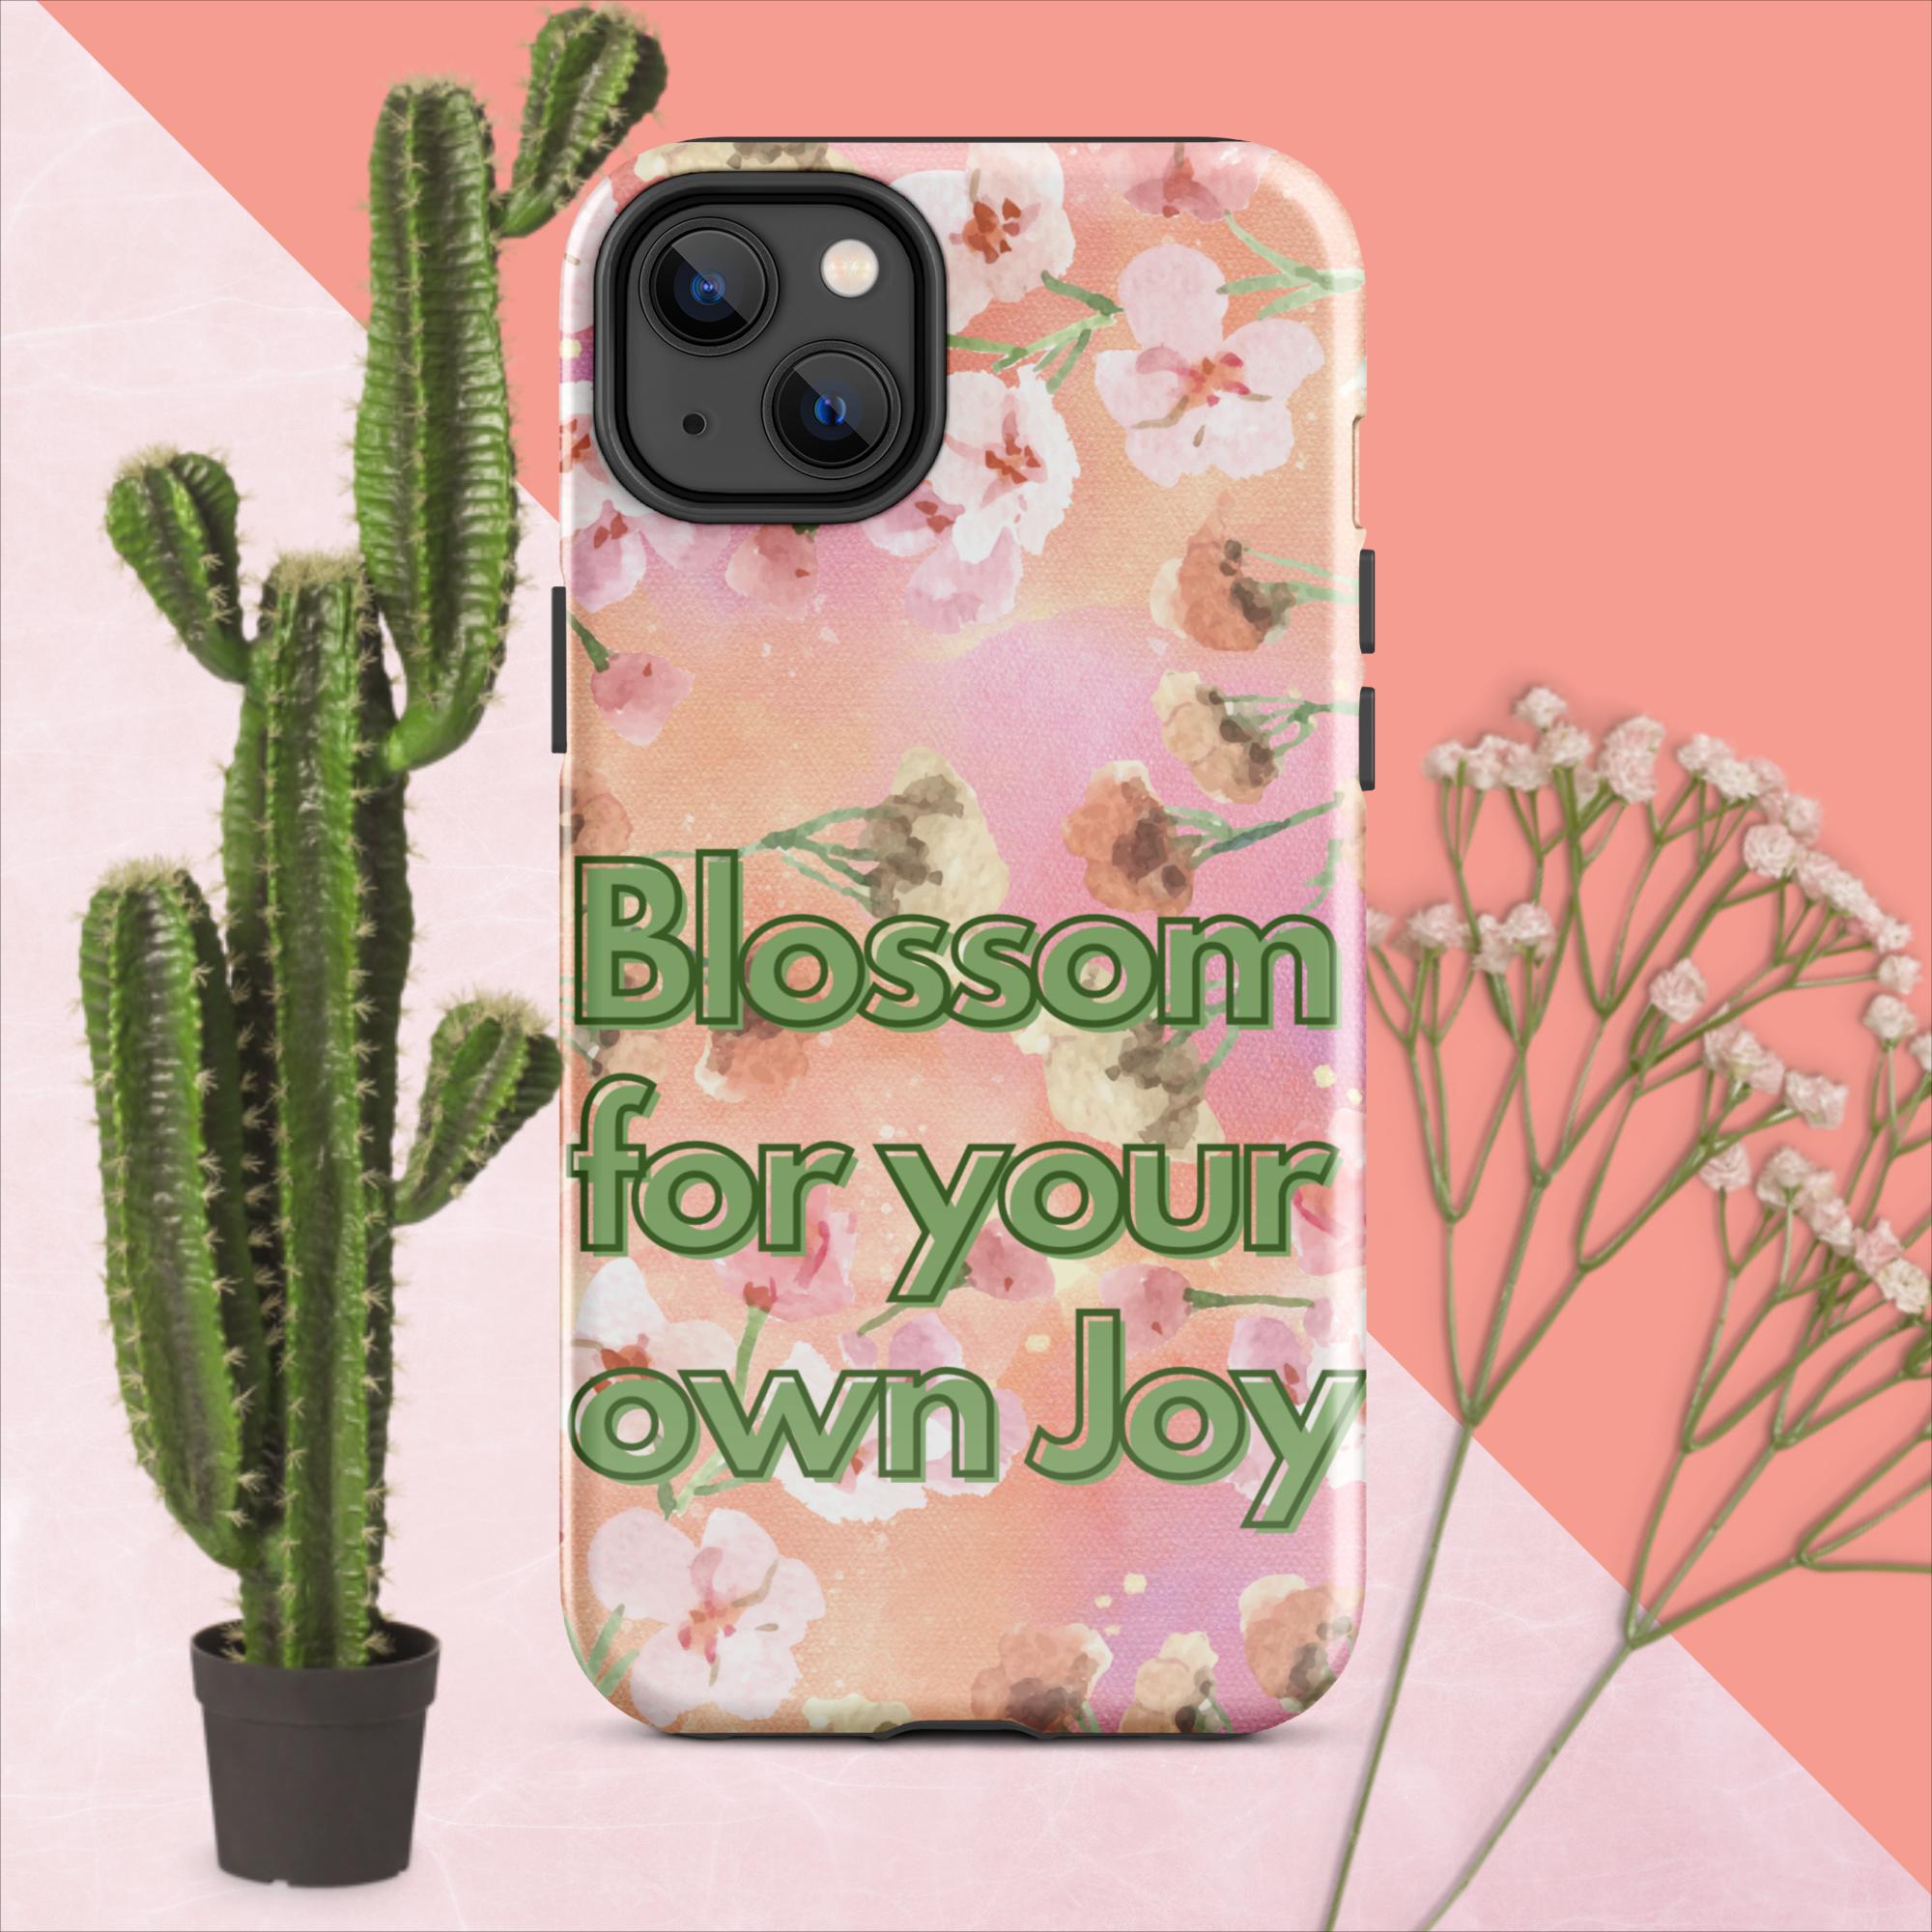 Blossom for your Own Joy - Iphone Case